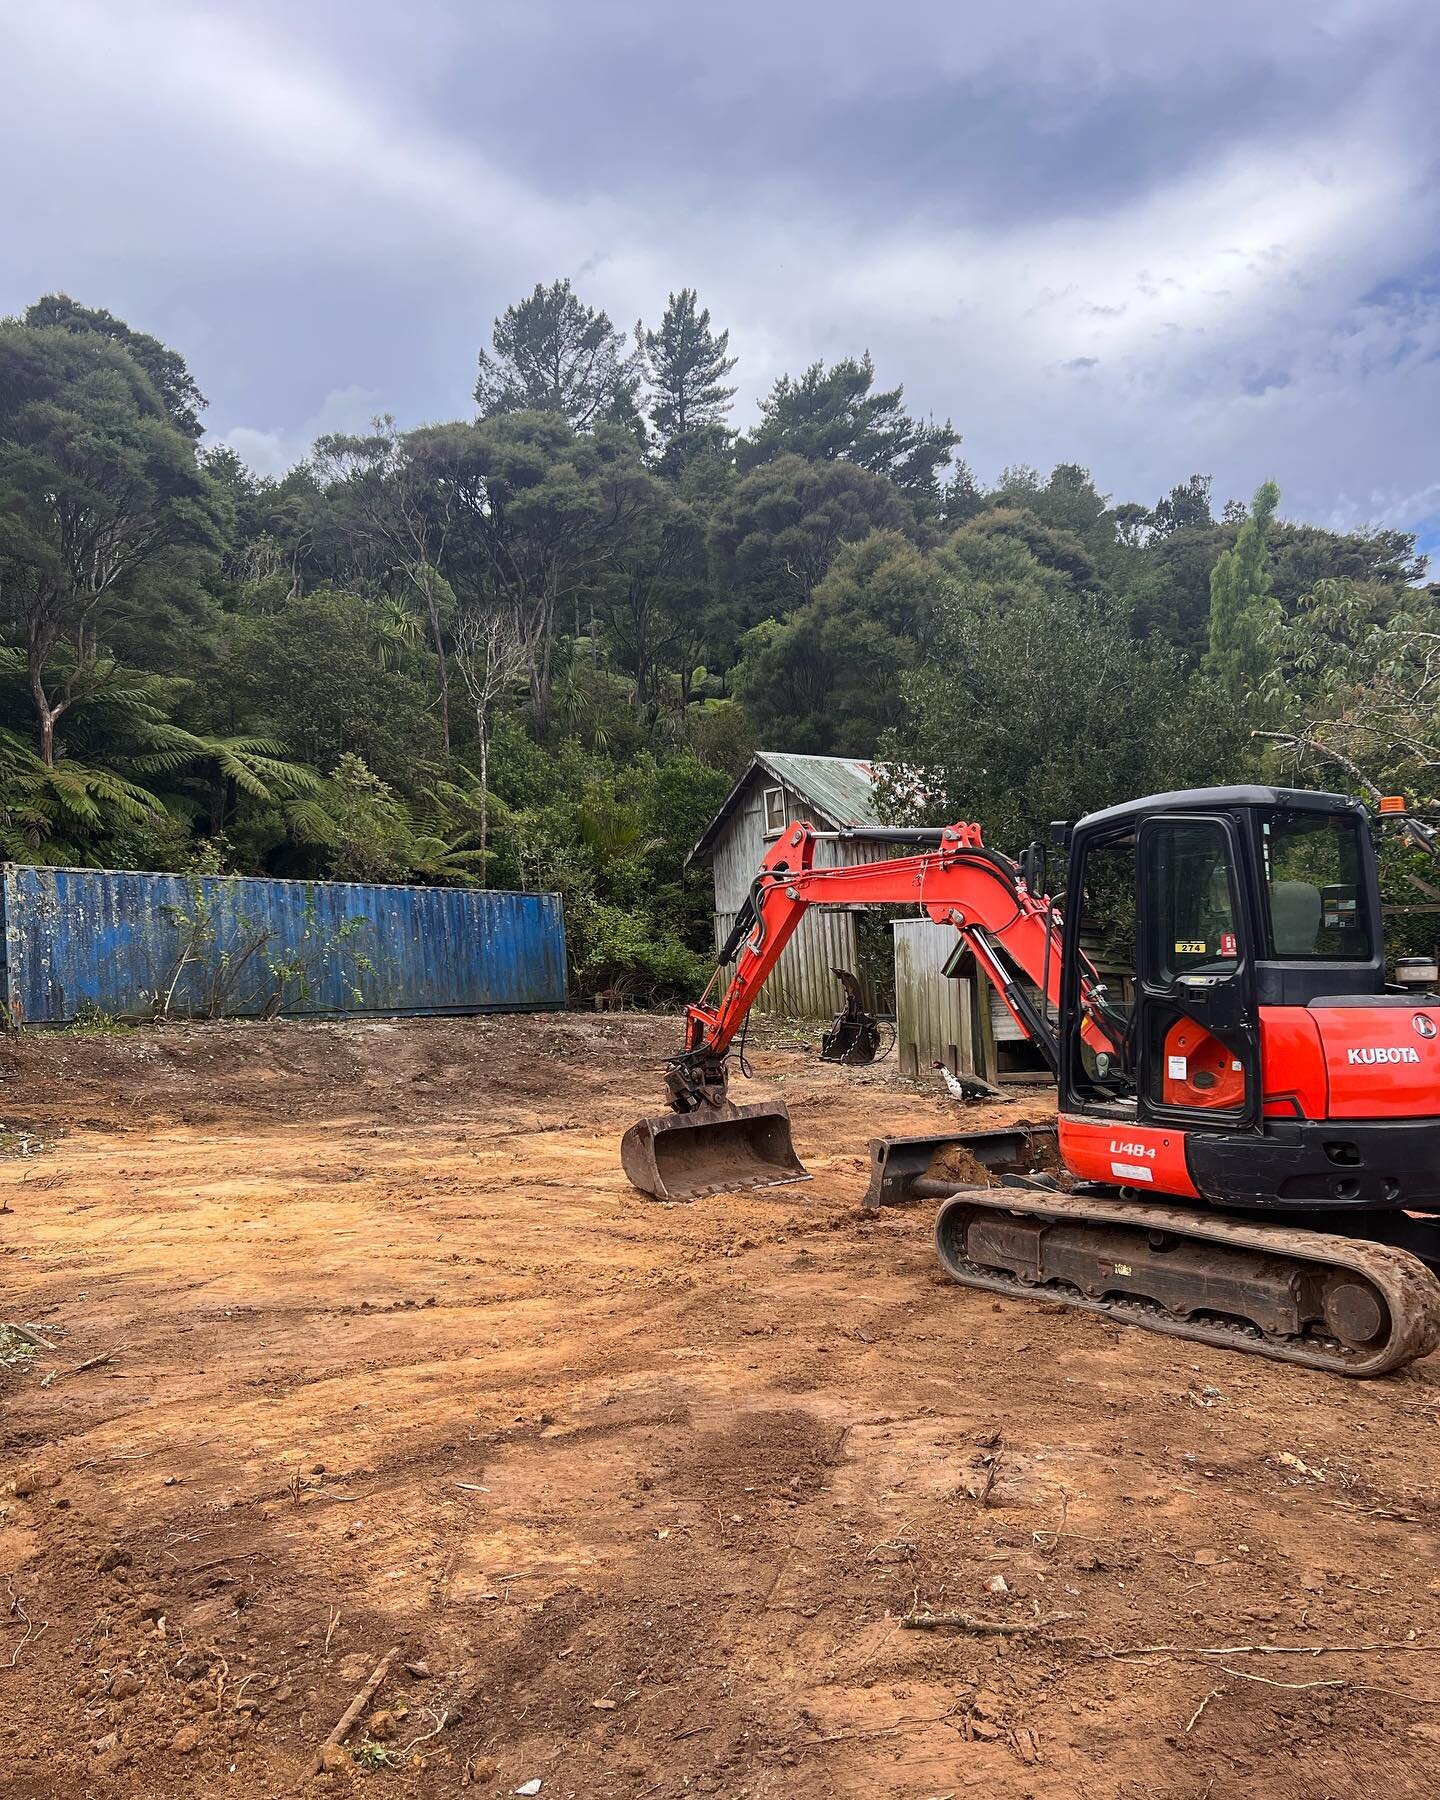 Transforming outdoor spaces one job at a time! Check out our team at Shaw Contracting Services clearing bush with our Kabota U4.5 and grab bucket to prepare for top soil and a new lawn. Contact us for all your excavation and landscaping needs. #lands